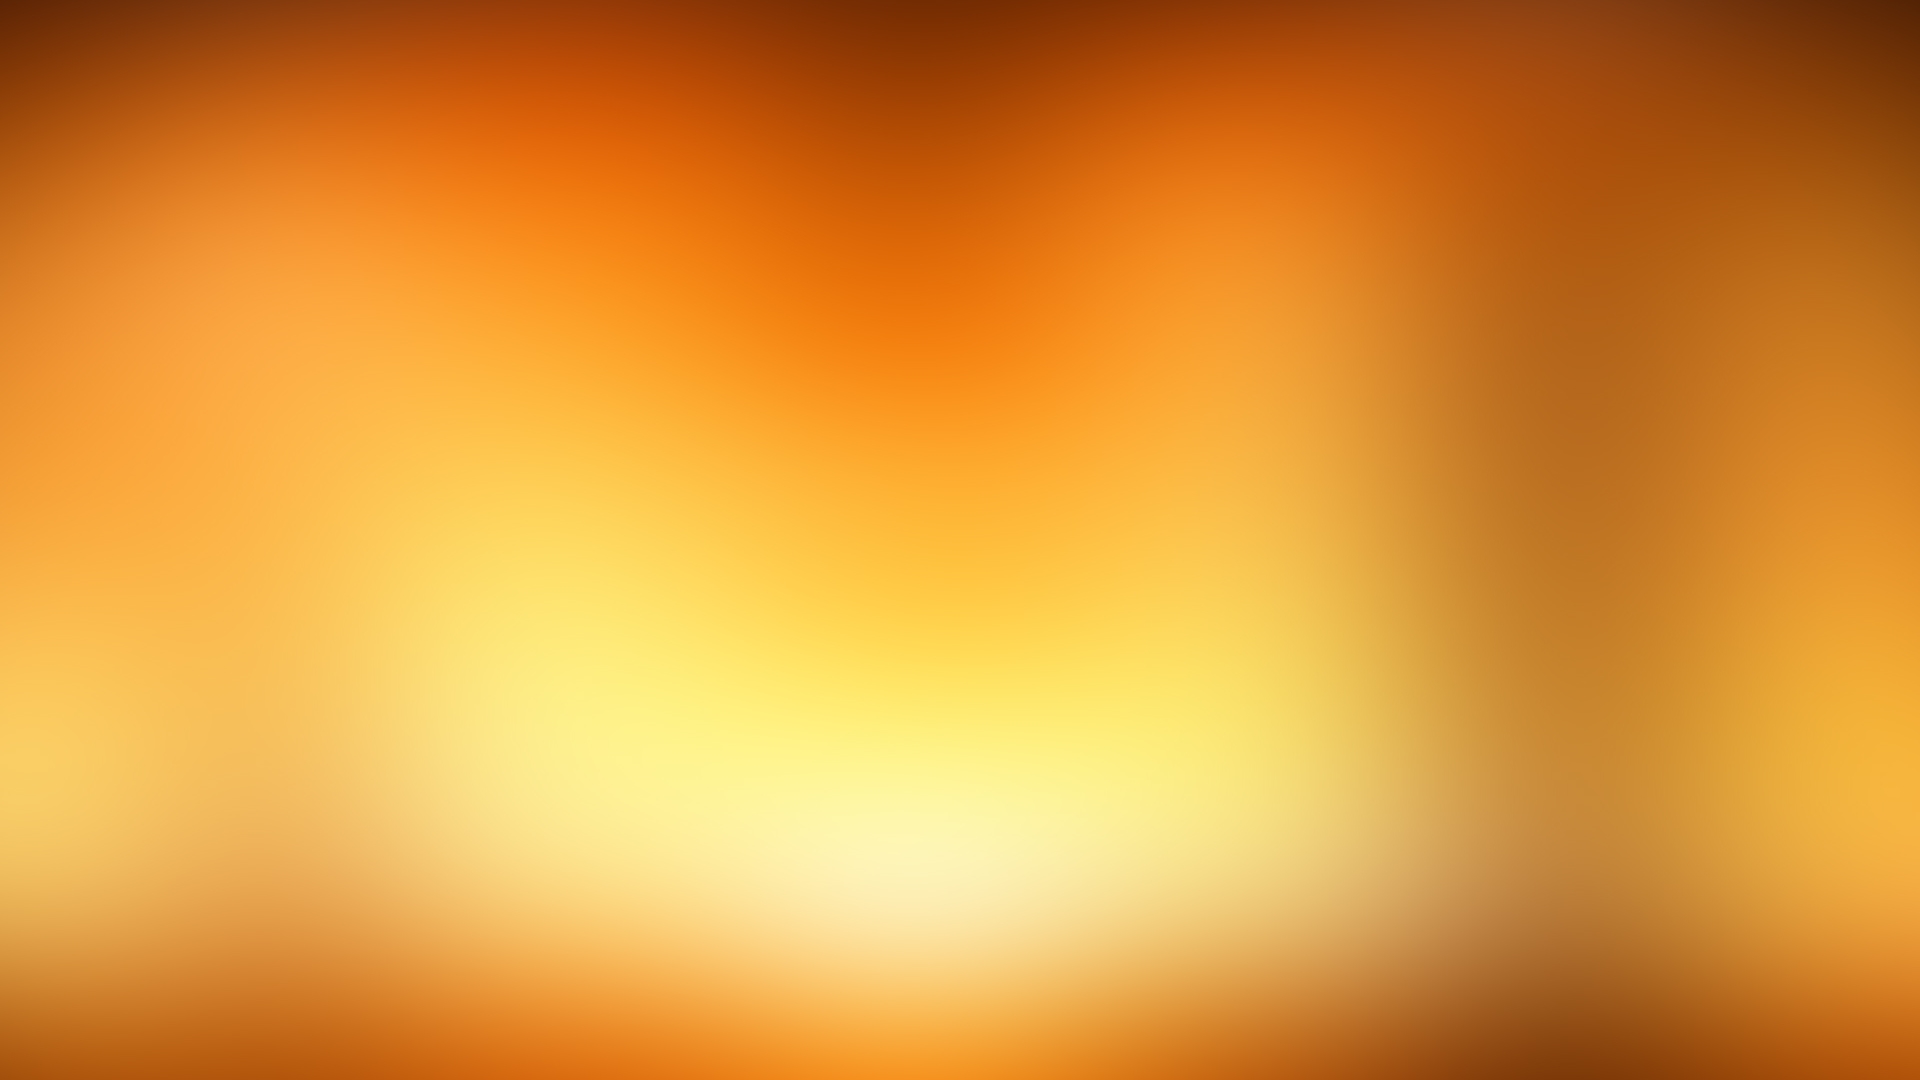 warm gradient wallpaper 7401 7687 hd wallpapers The Criterion